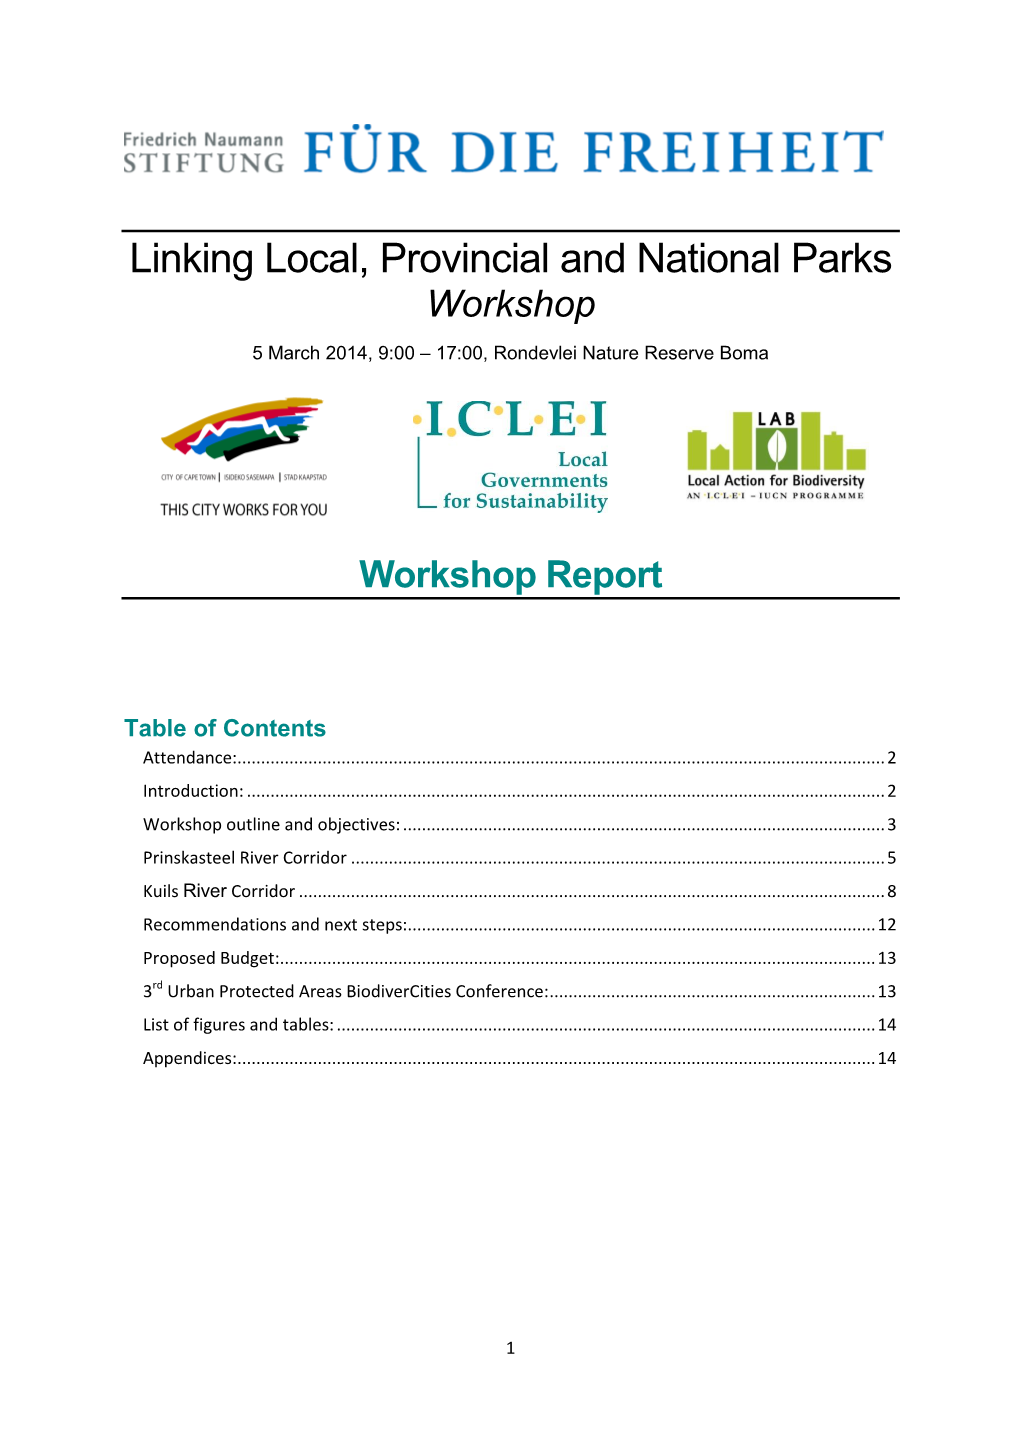 Linking Local, Provincial and National Parks Workshop